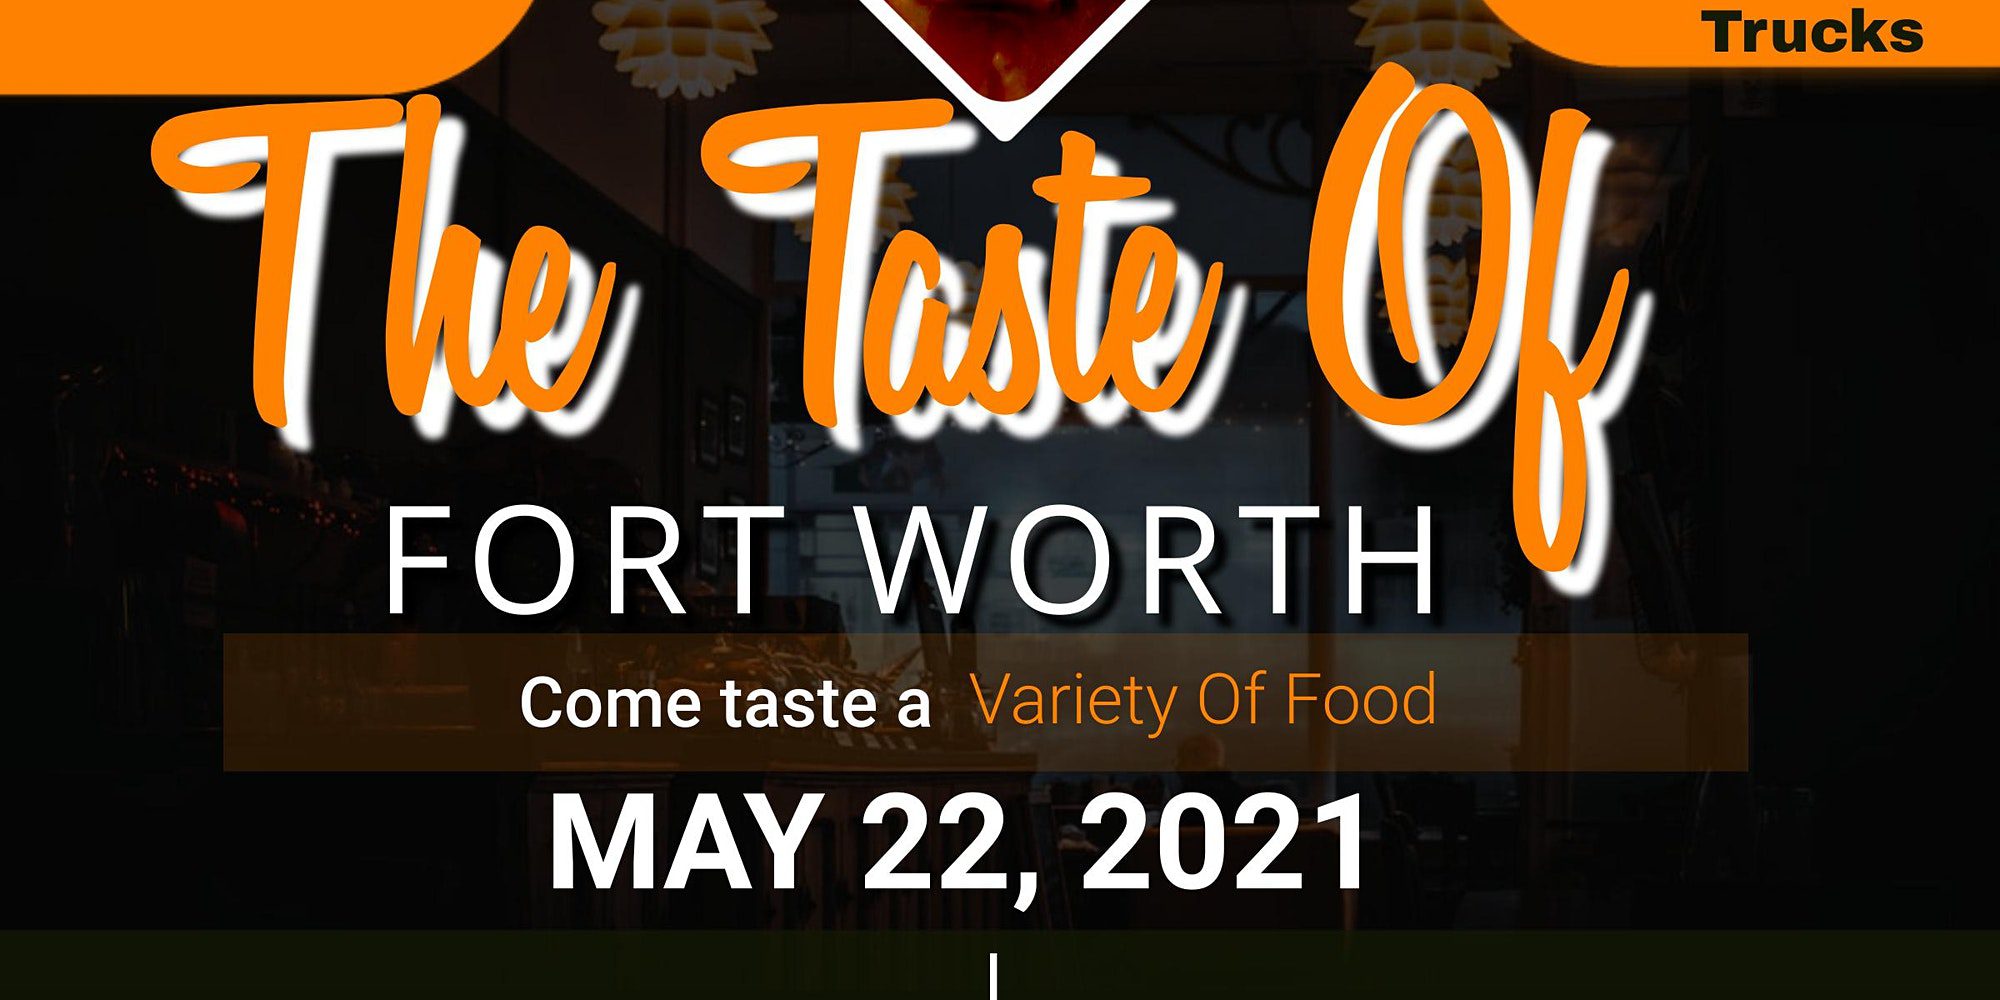 The Taste of Fort Worth Fort Worth Woman